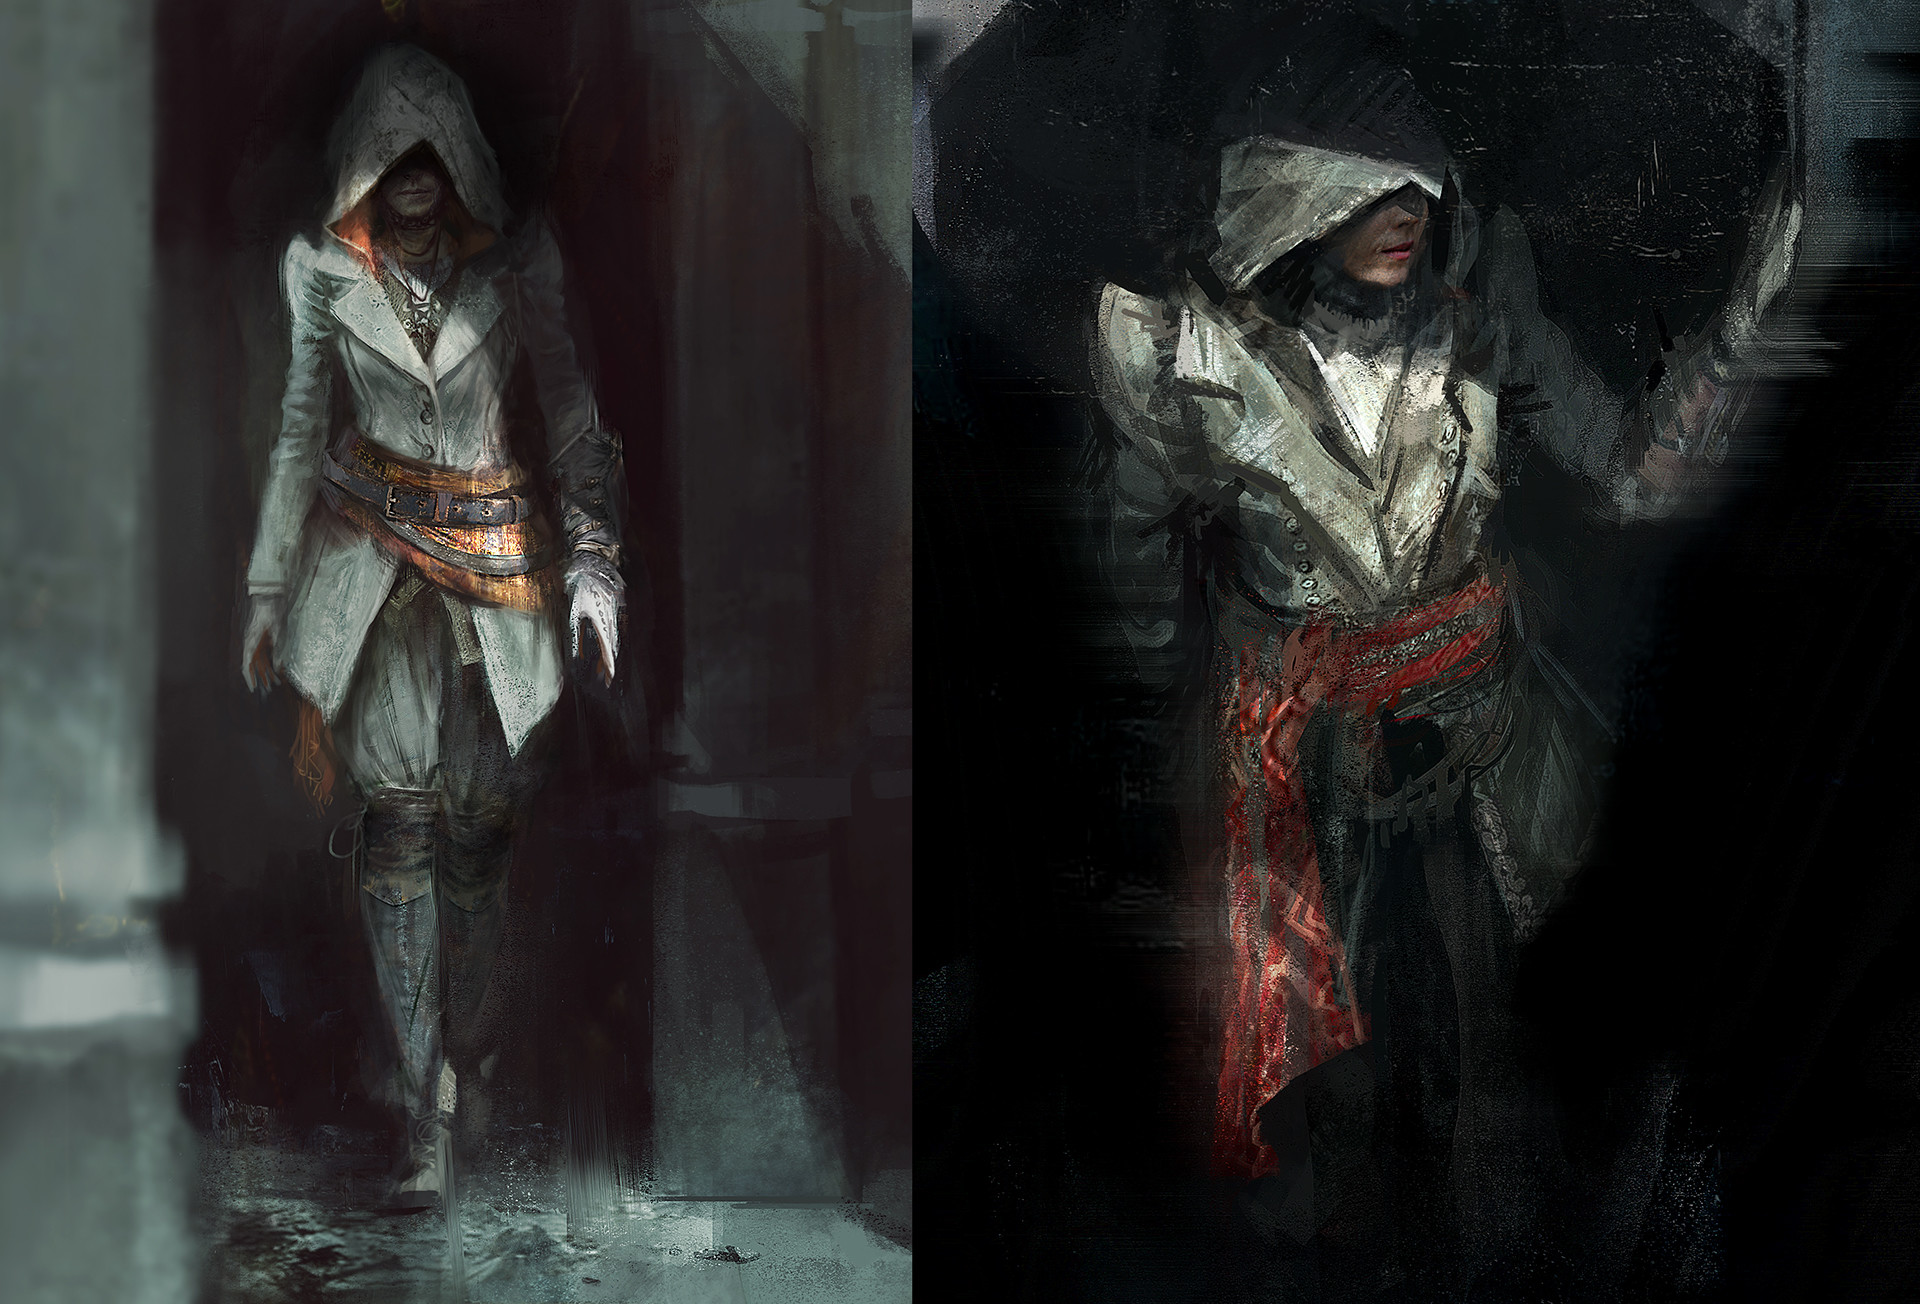 Image Acs Older Evie Frye 2 Concept Art Assassins Creed Wiki Fandom Powered By Wikia 9470